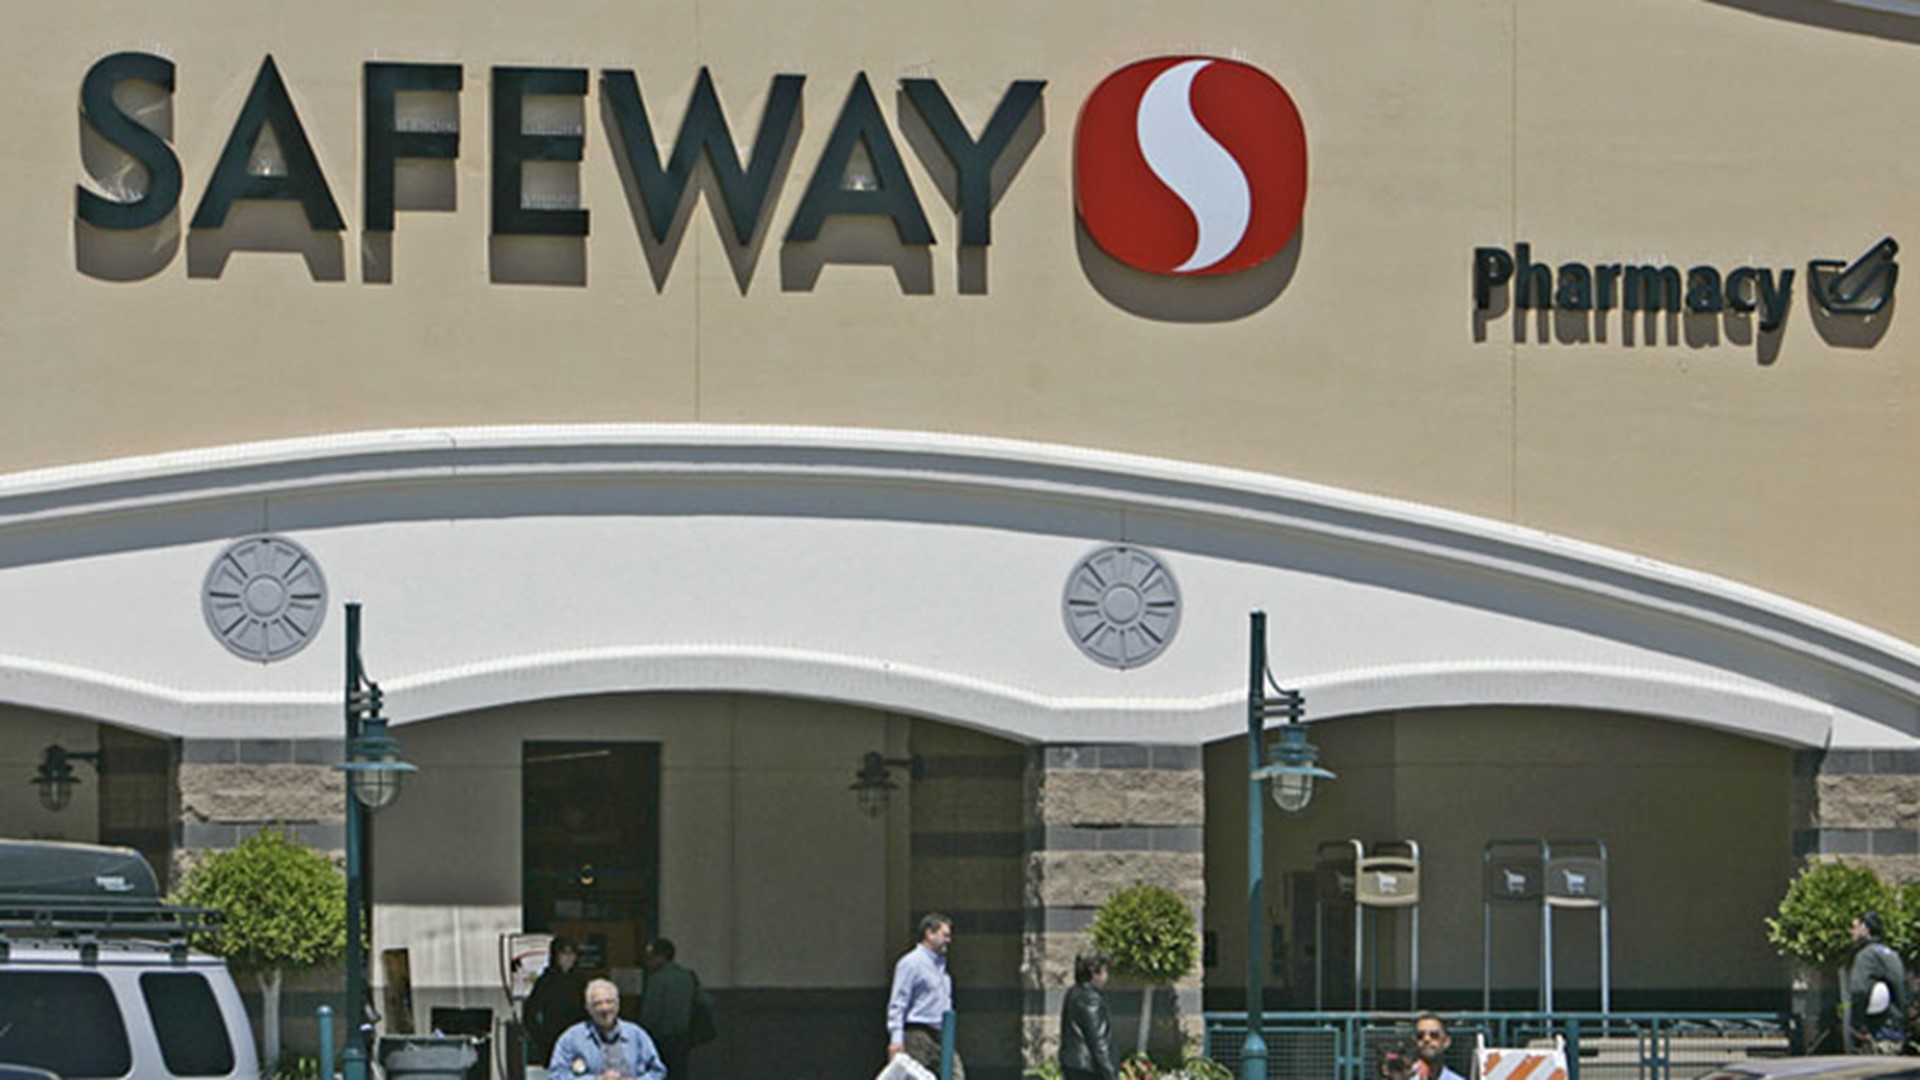 Safeway grocery stores are launching a new program allowing SNAP recipients to purchase groceries online.